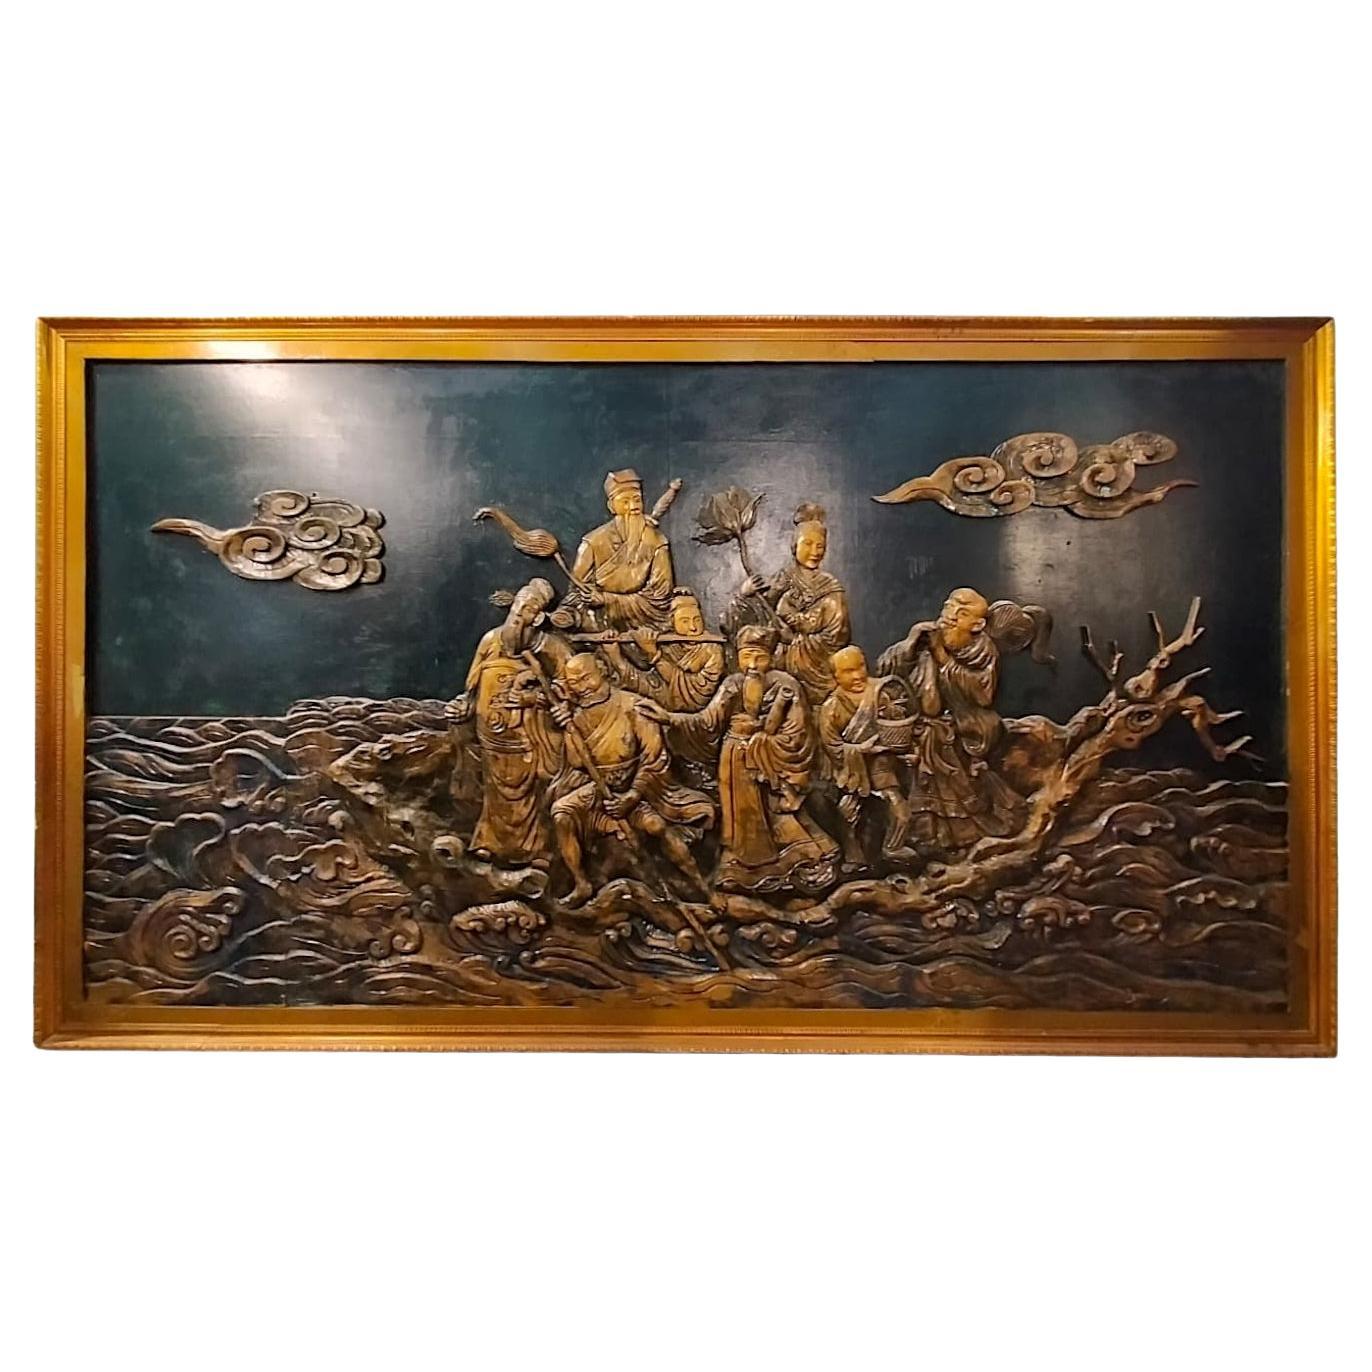 Chinese bas-relief depicting the Eight Immortals and the "Crossing of the Seas". For Sale